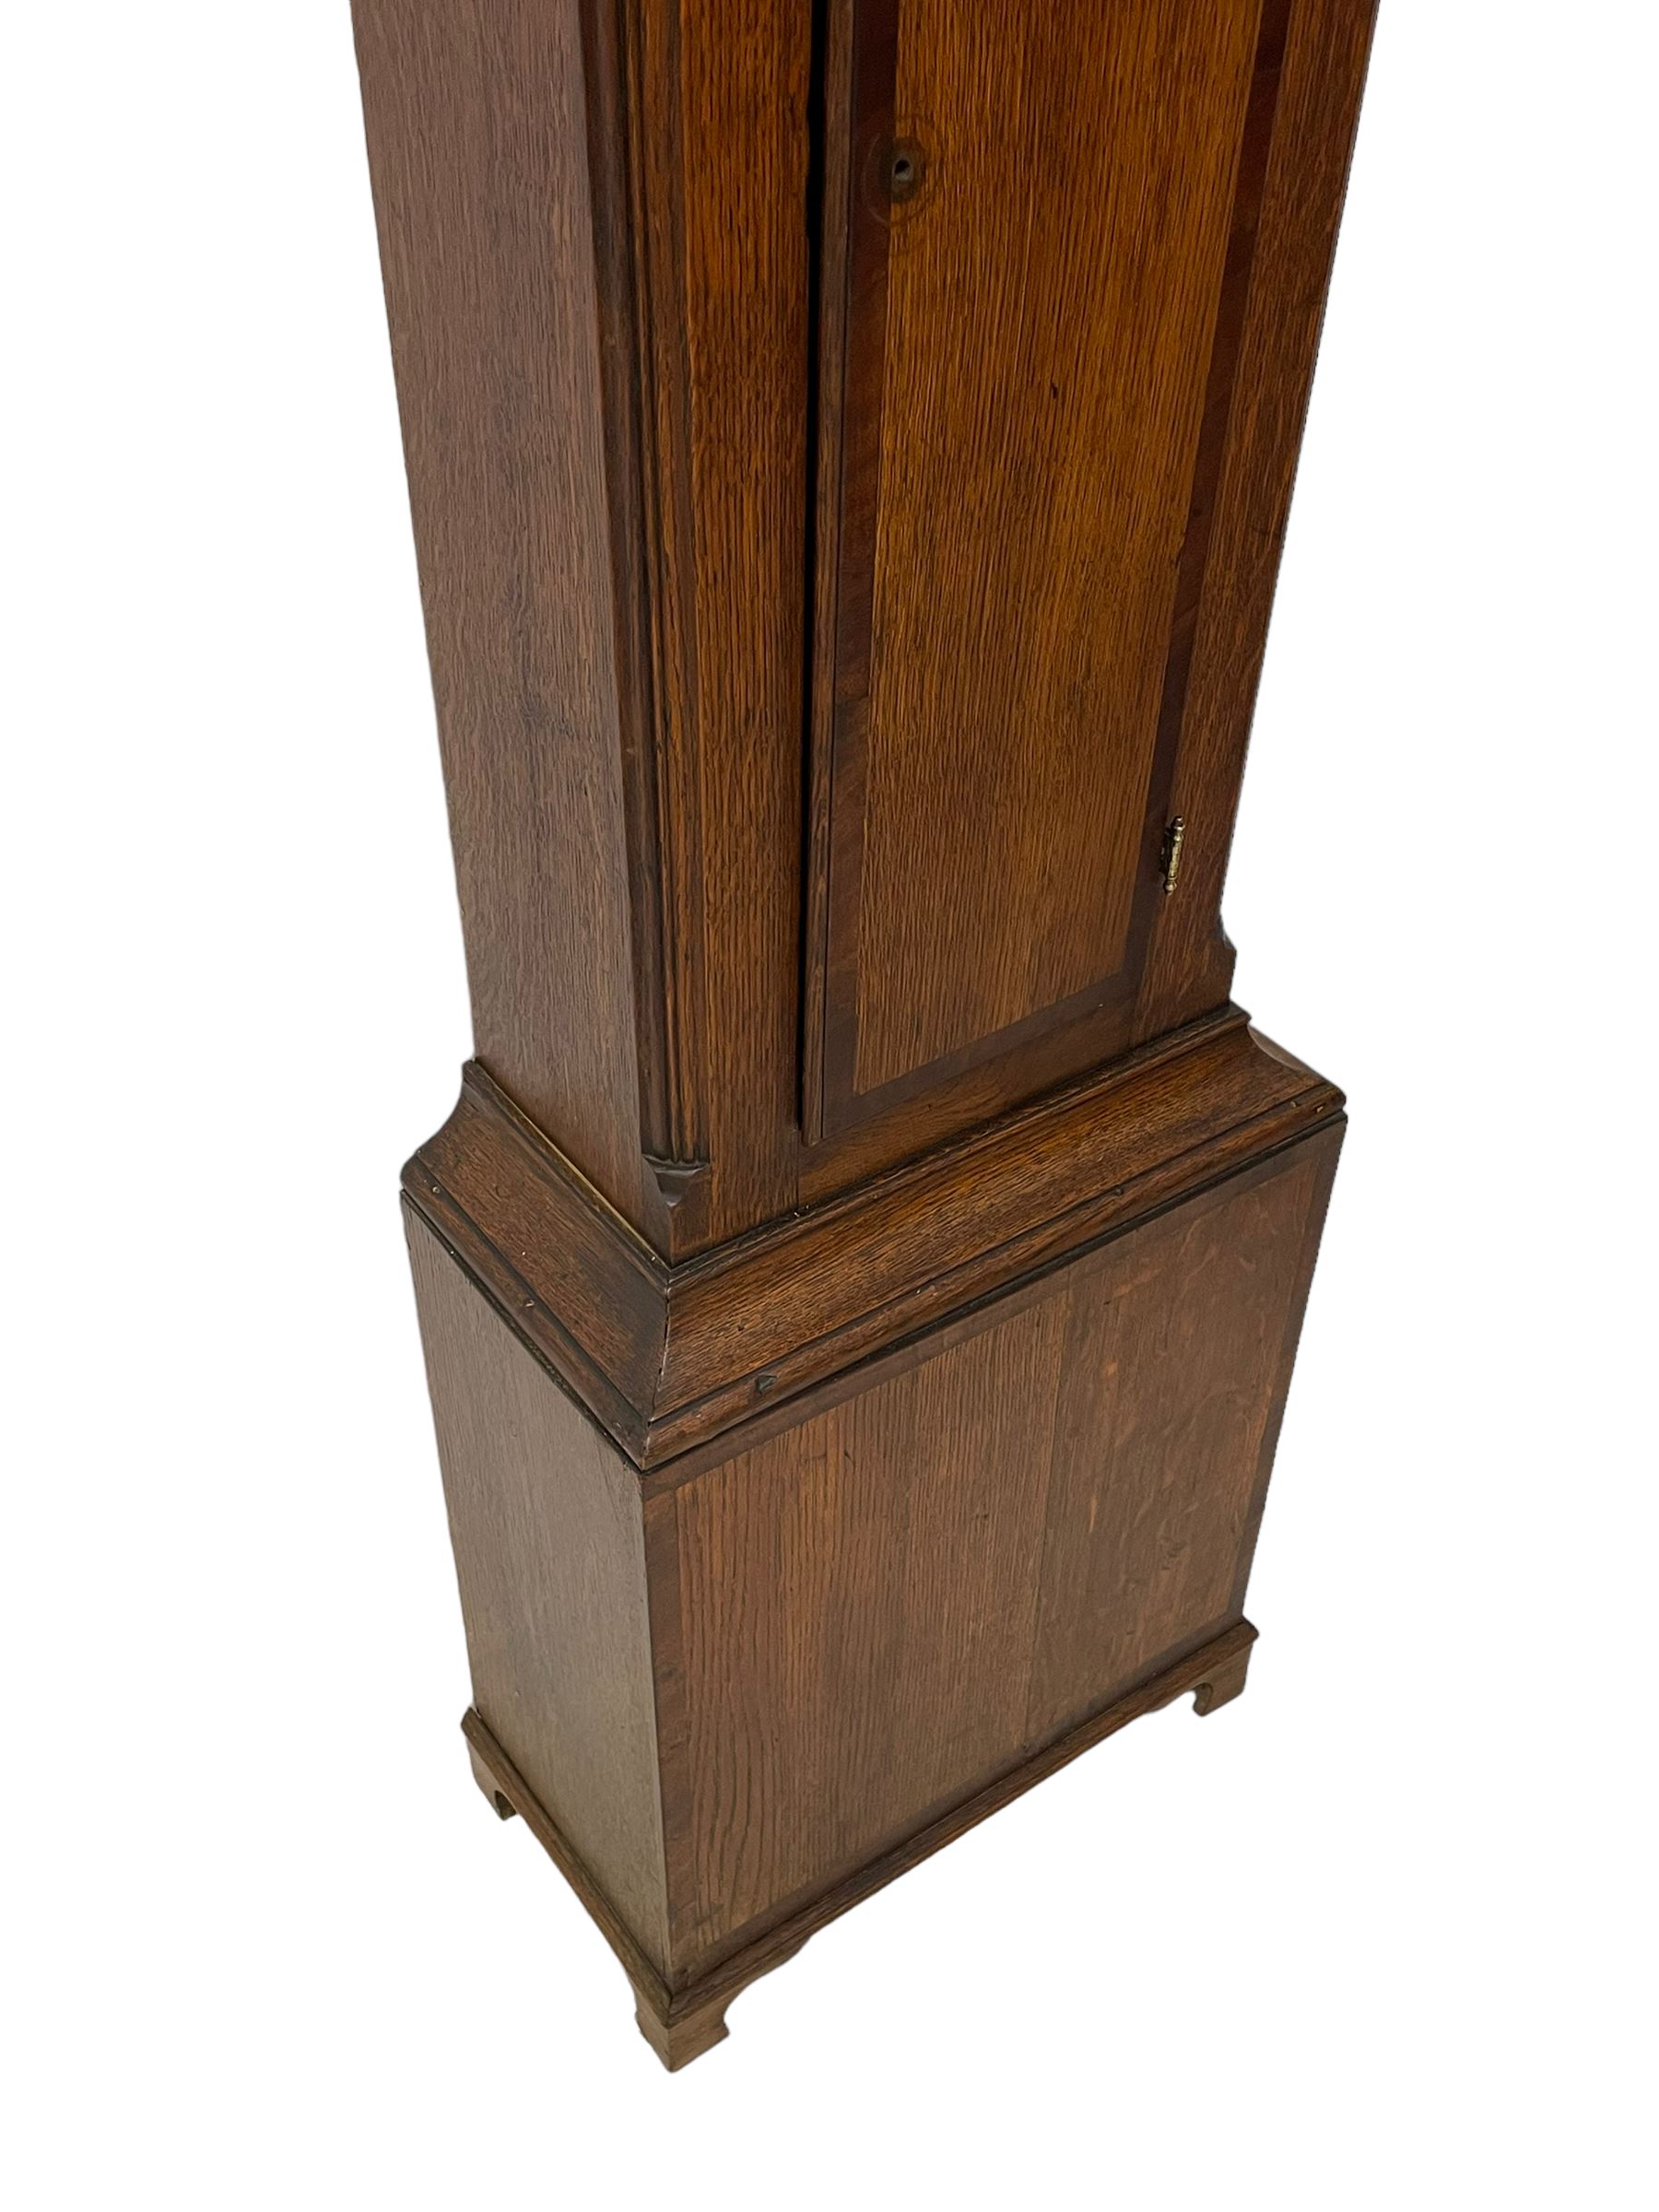 John Greaves of Newcastle - Mid-18th century 8-day oak longcase clock with a flat top - Image 7 of 12